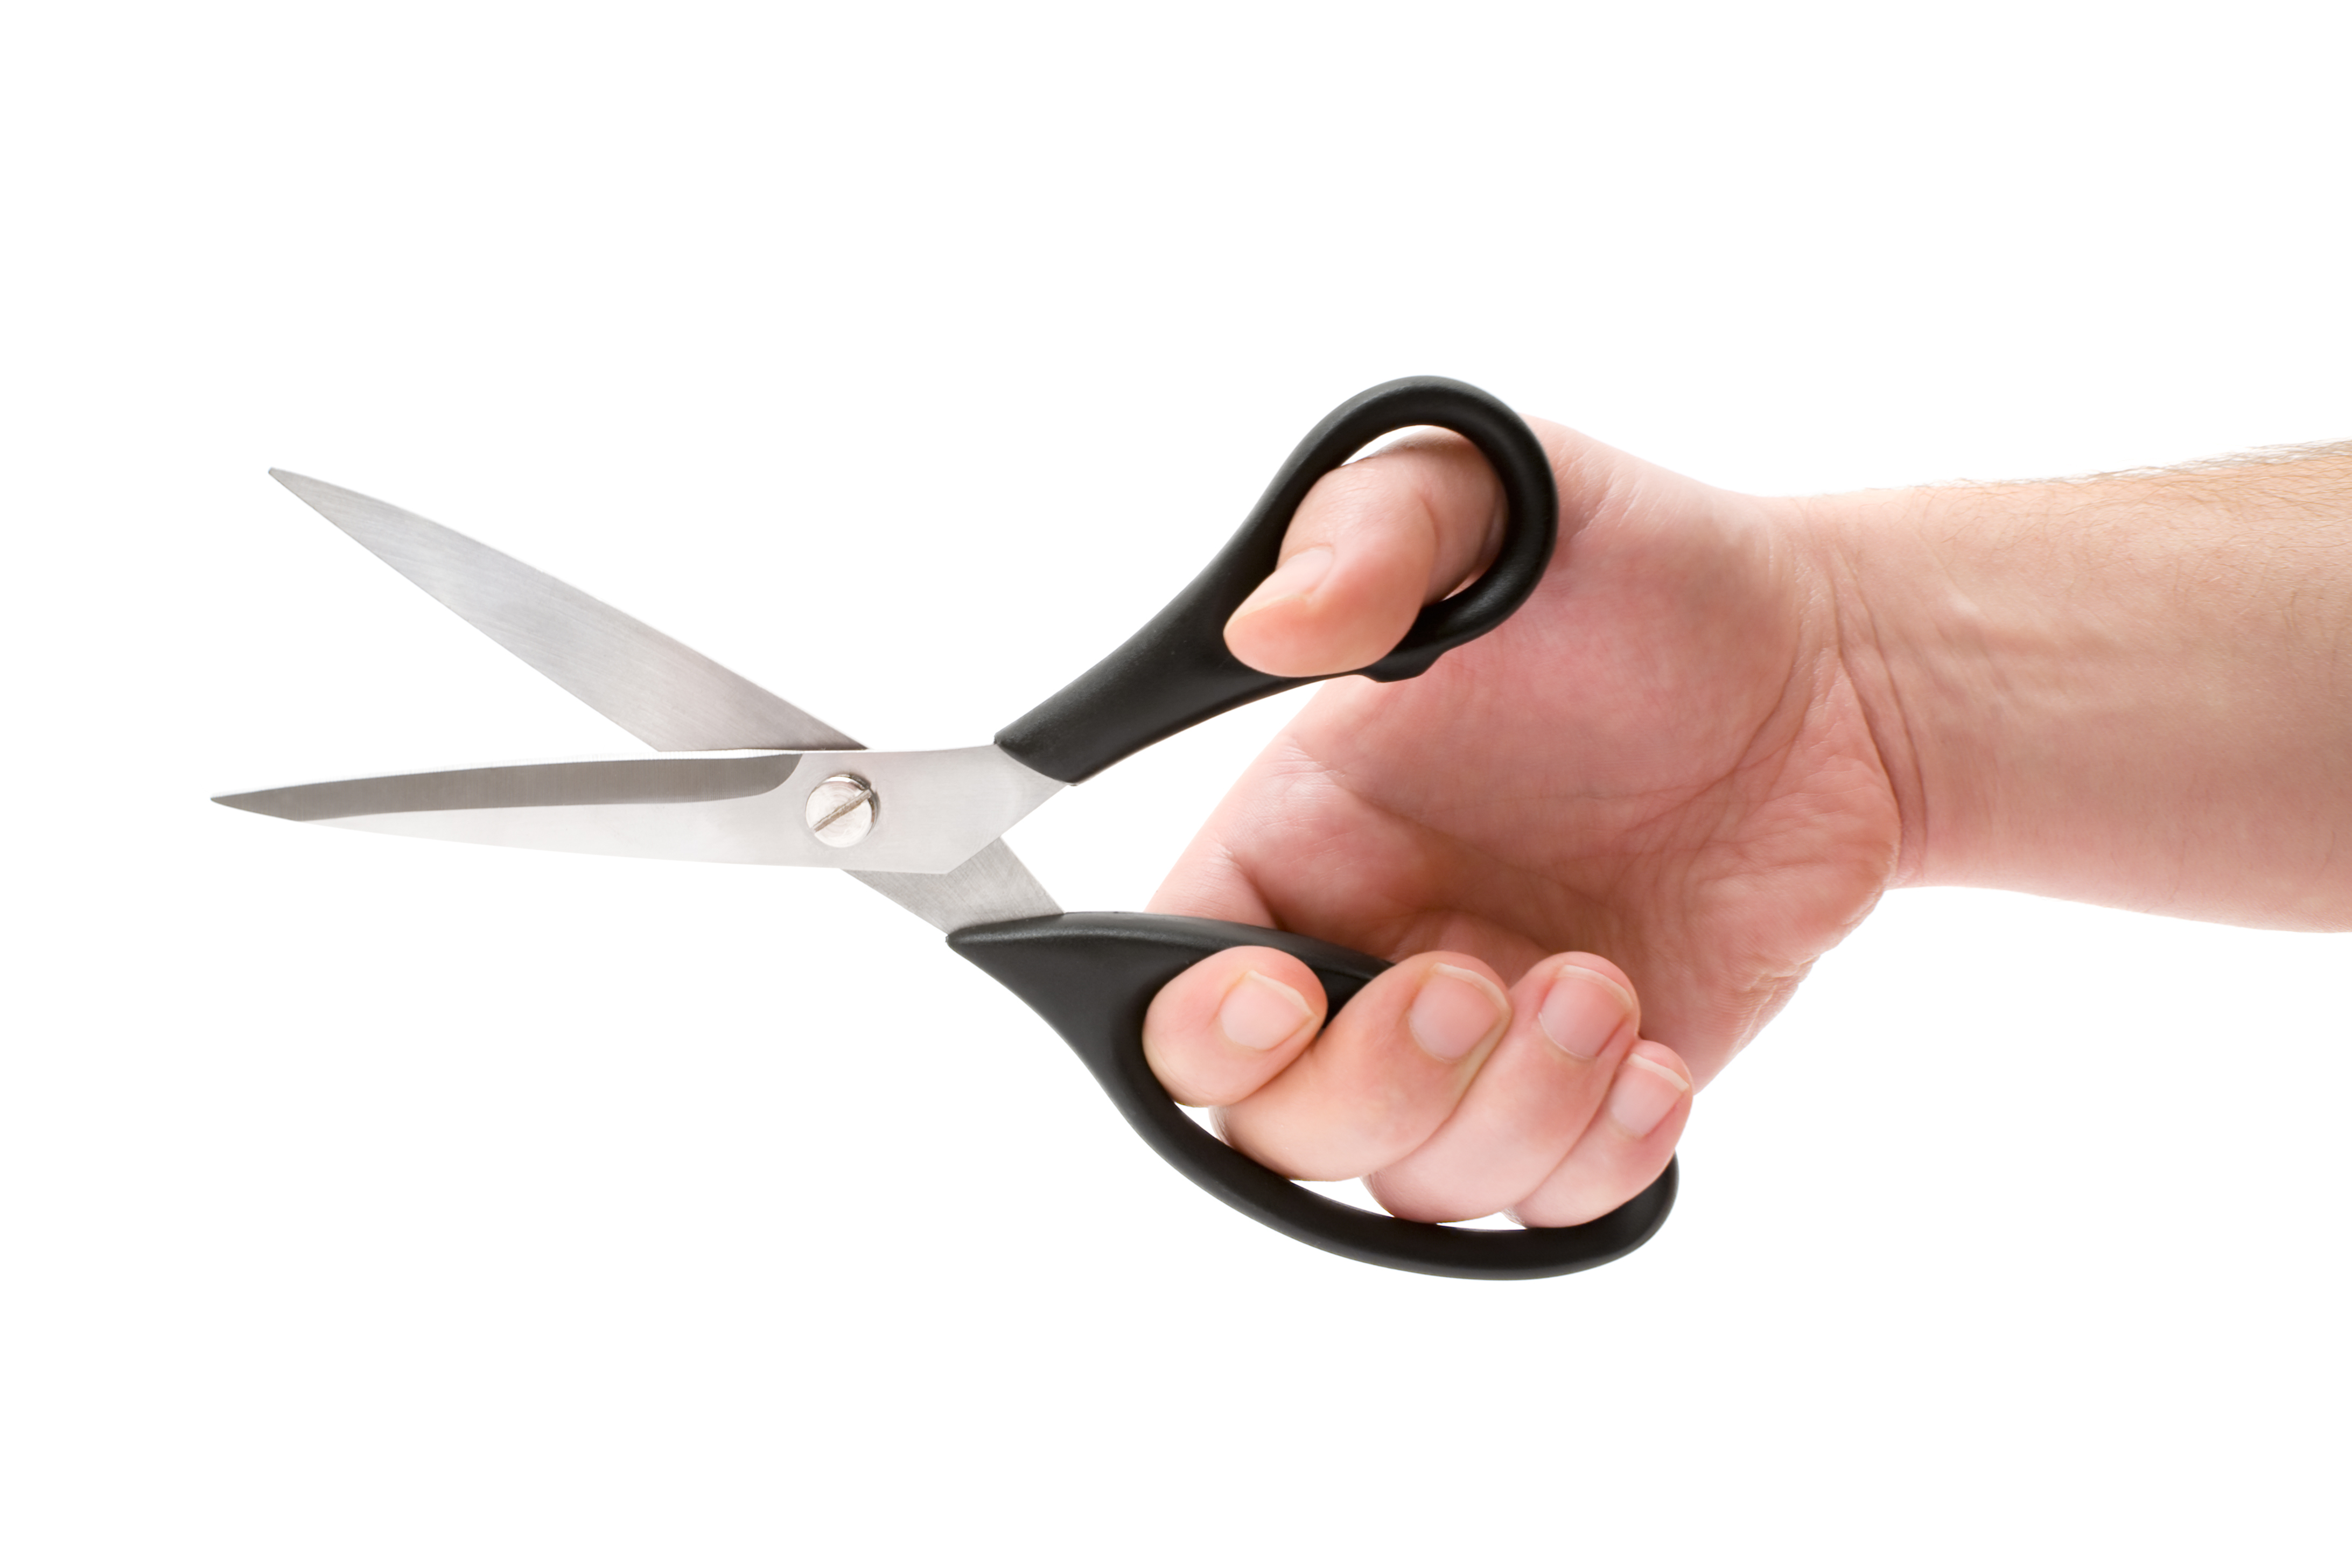 Someone holding a pair of scissors | Source: Getty Images